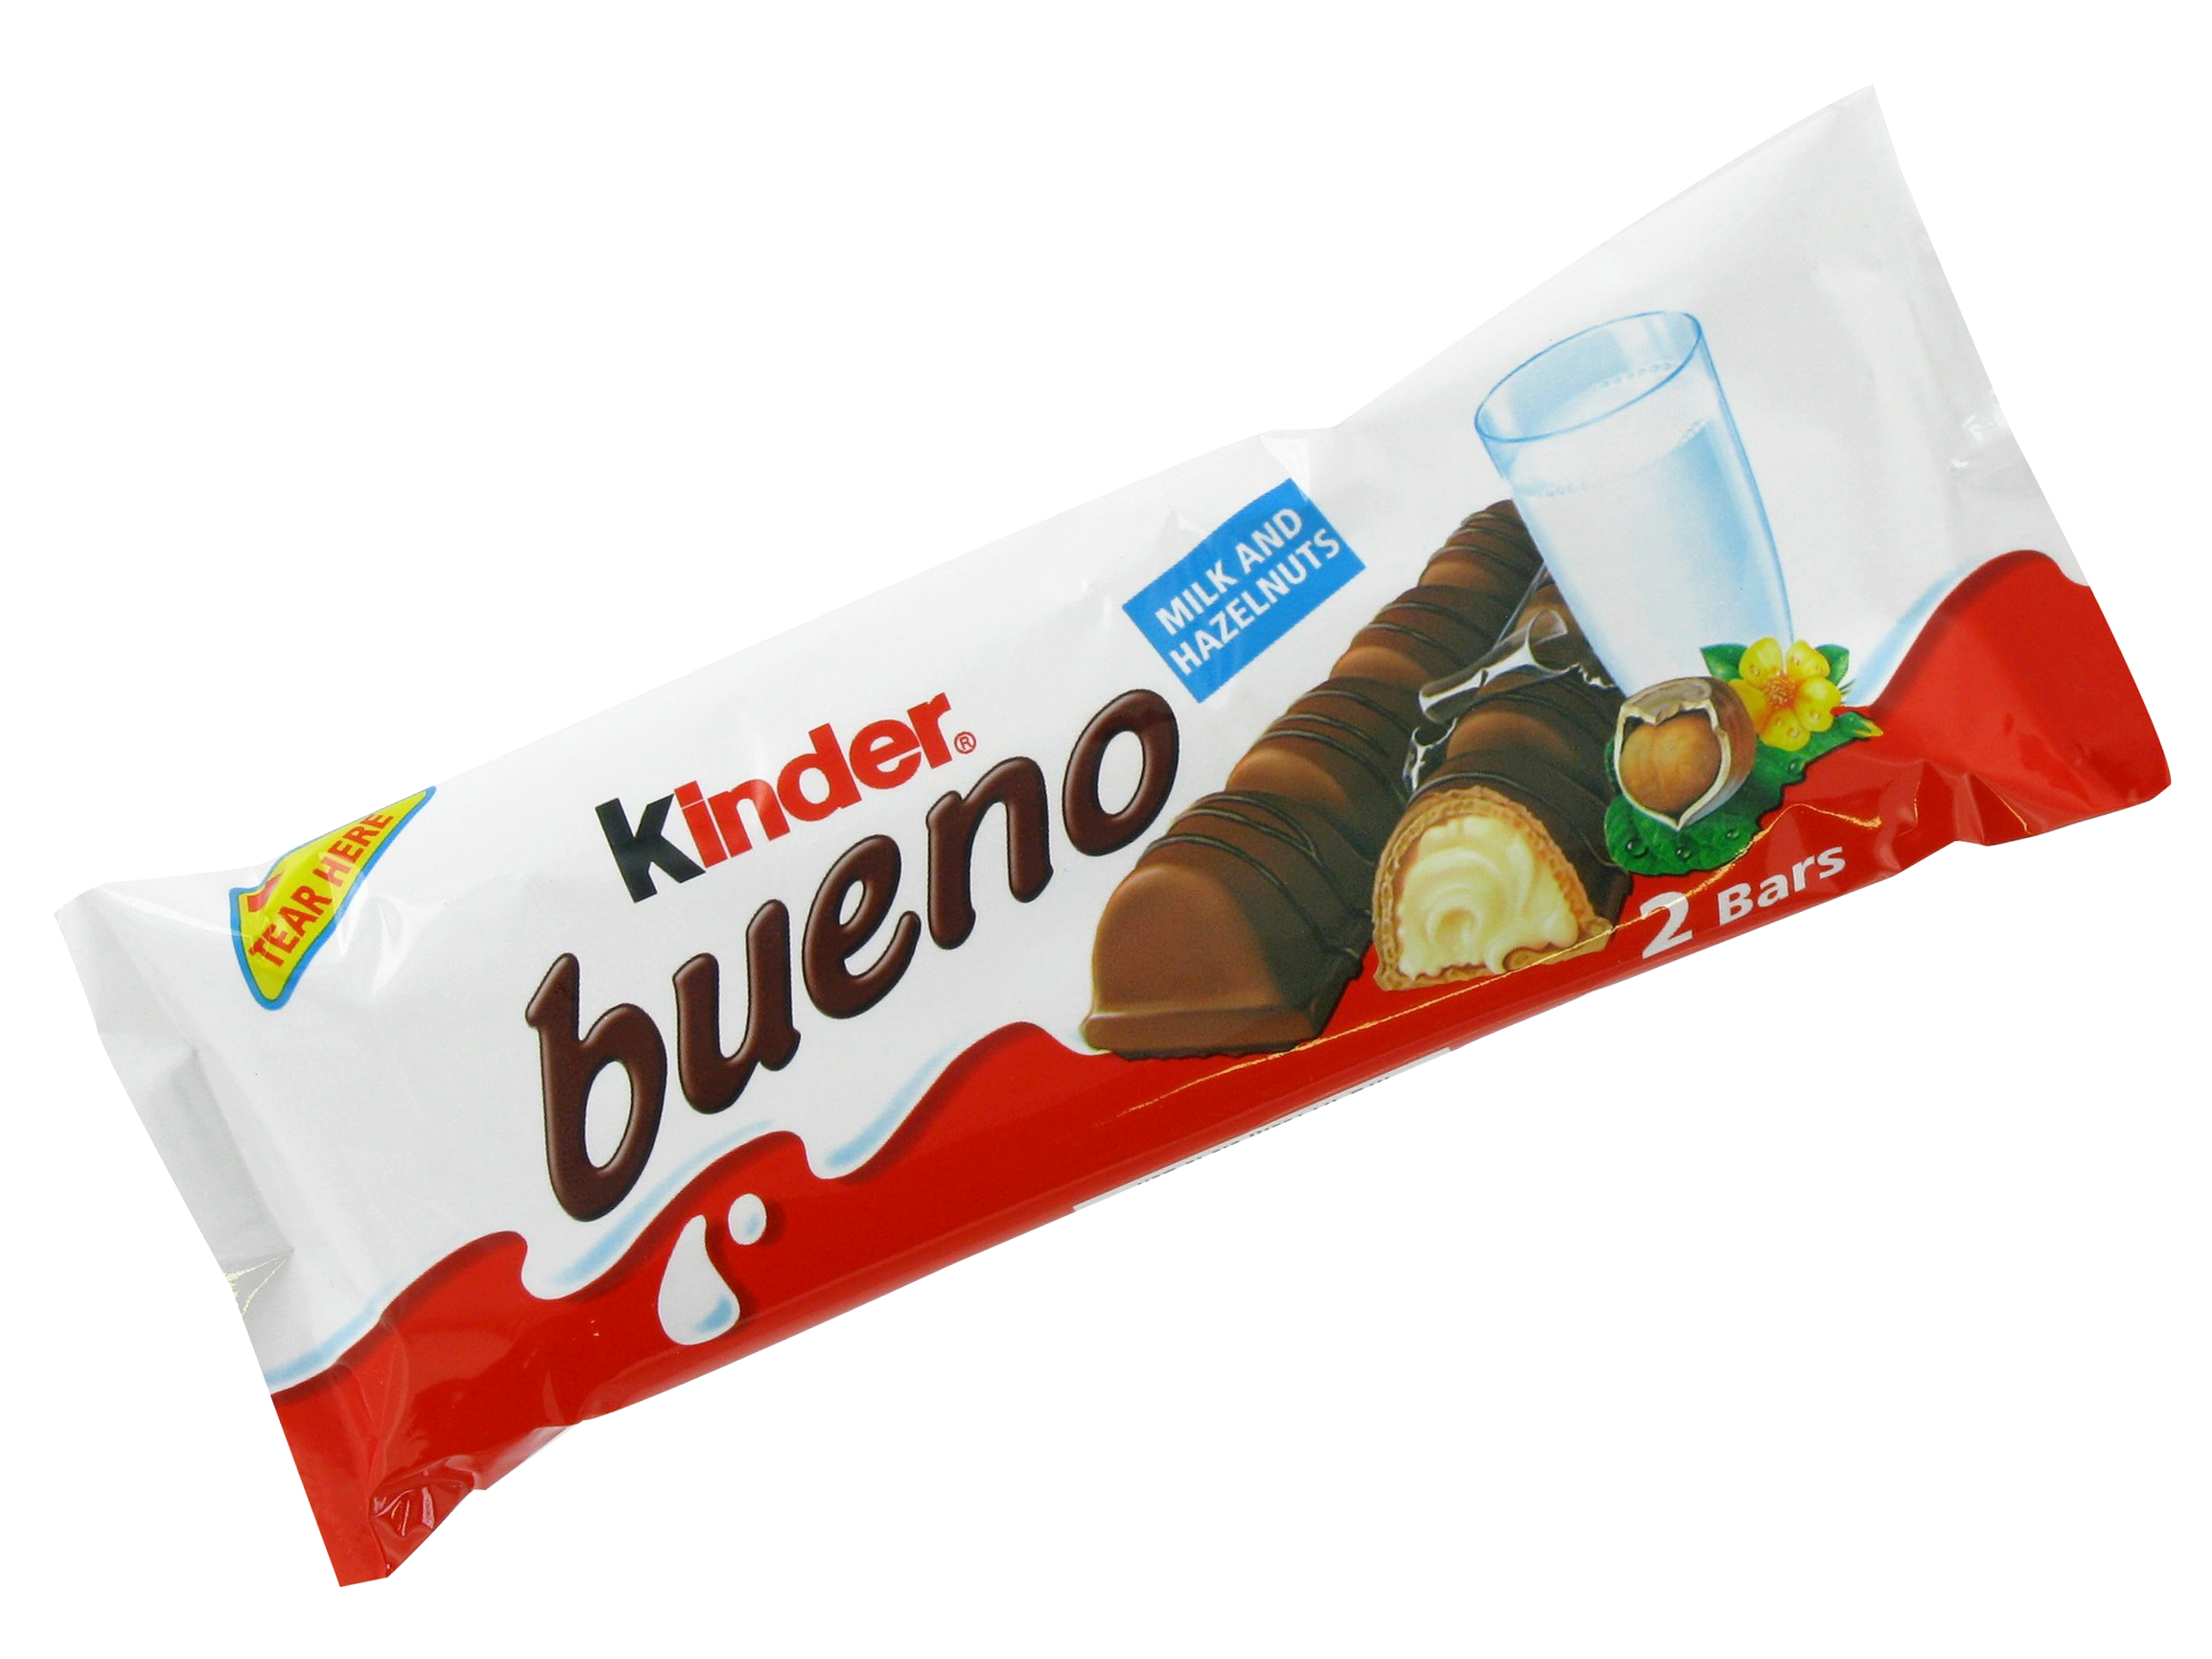 Kinder Bueno Pearls 300g PURCHASED FROM GERMANY (BACK ON 13 AUG)